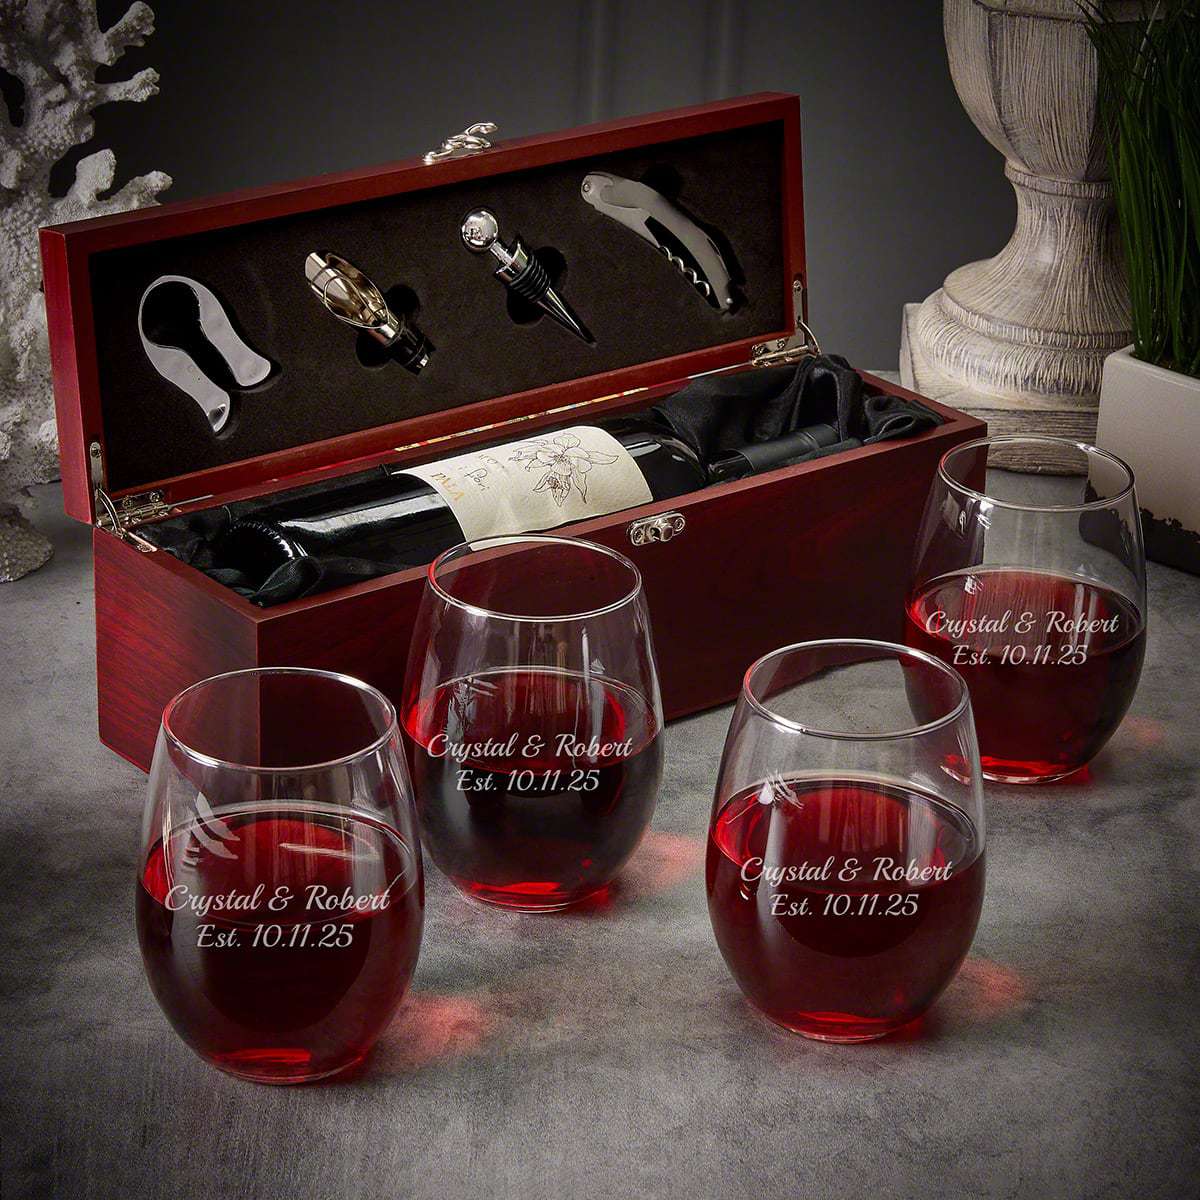 Personalized Stemless Wine Glass Set with Wine Gift Box - 9pc Two Lines of Text